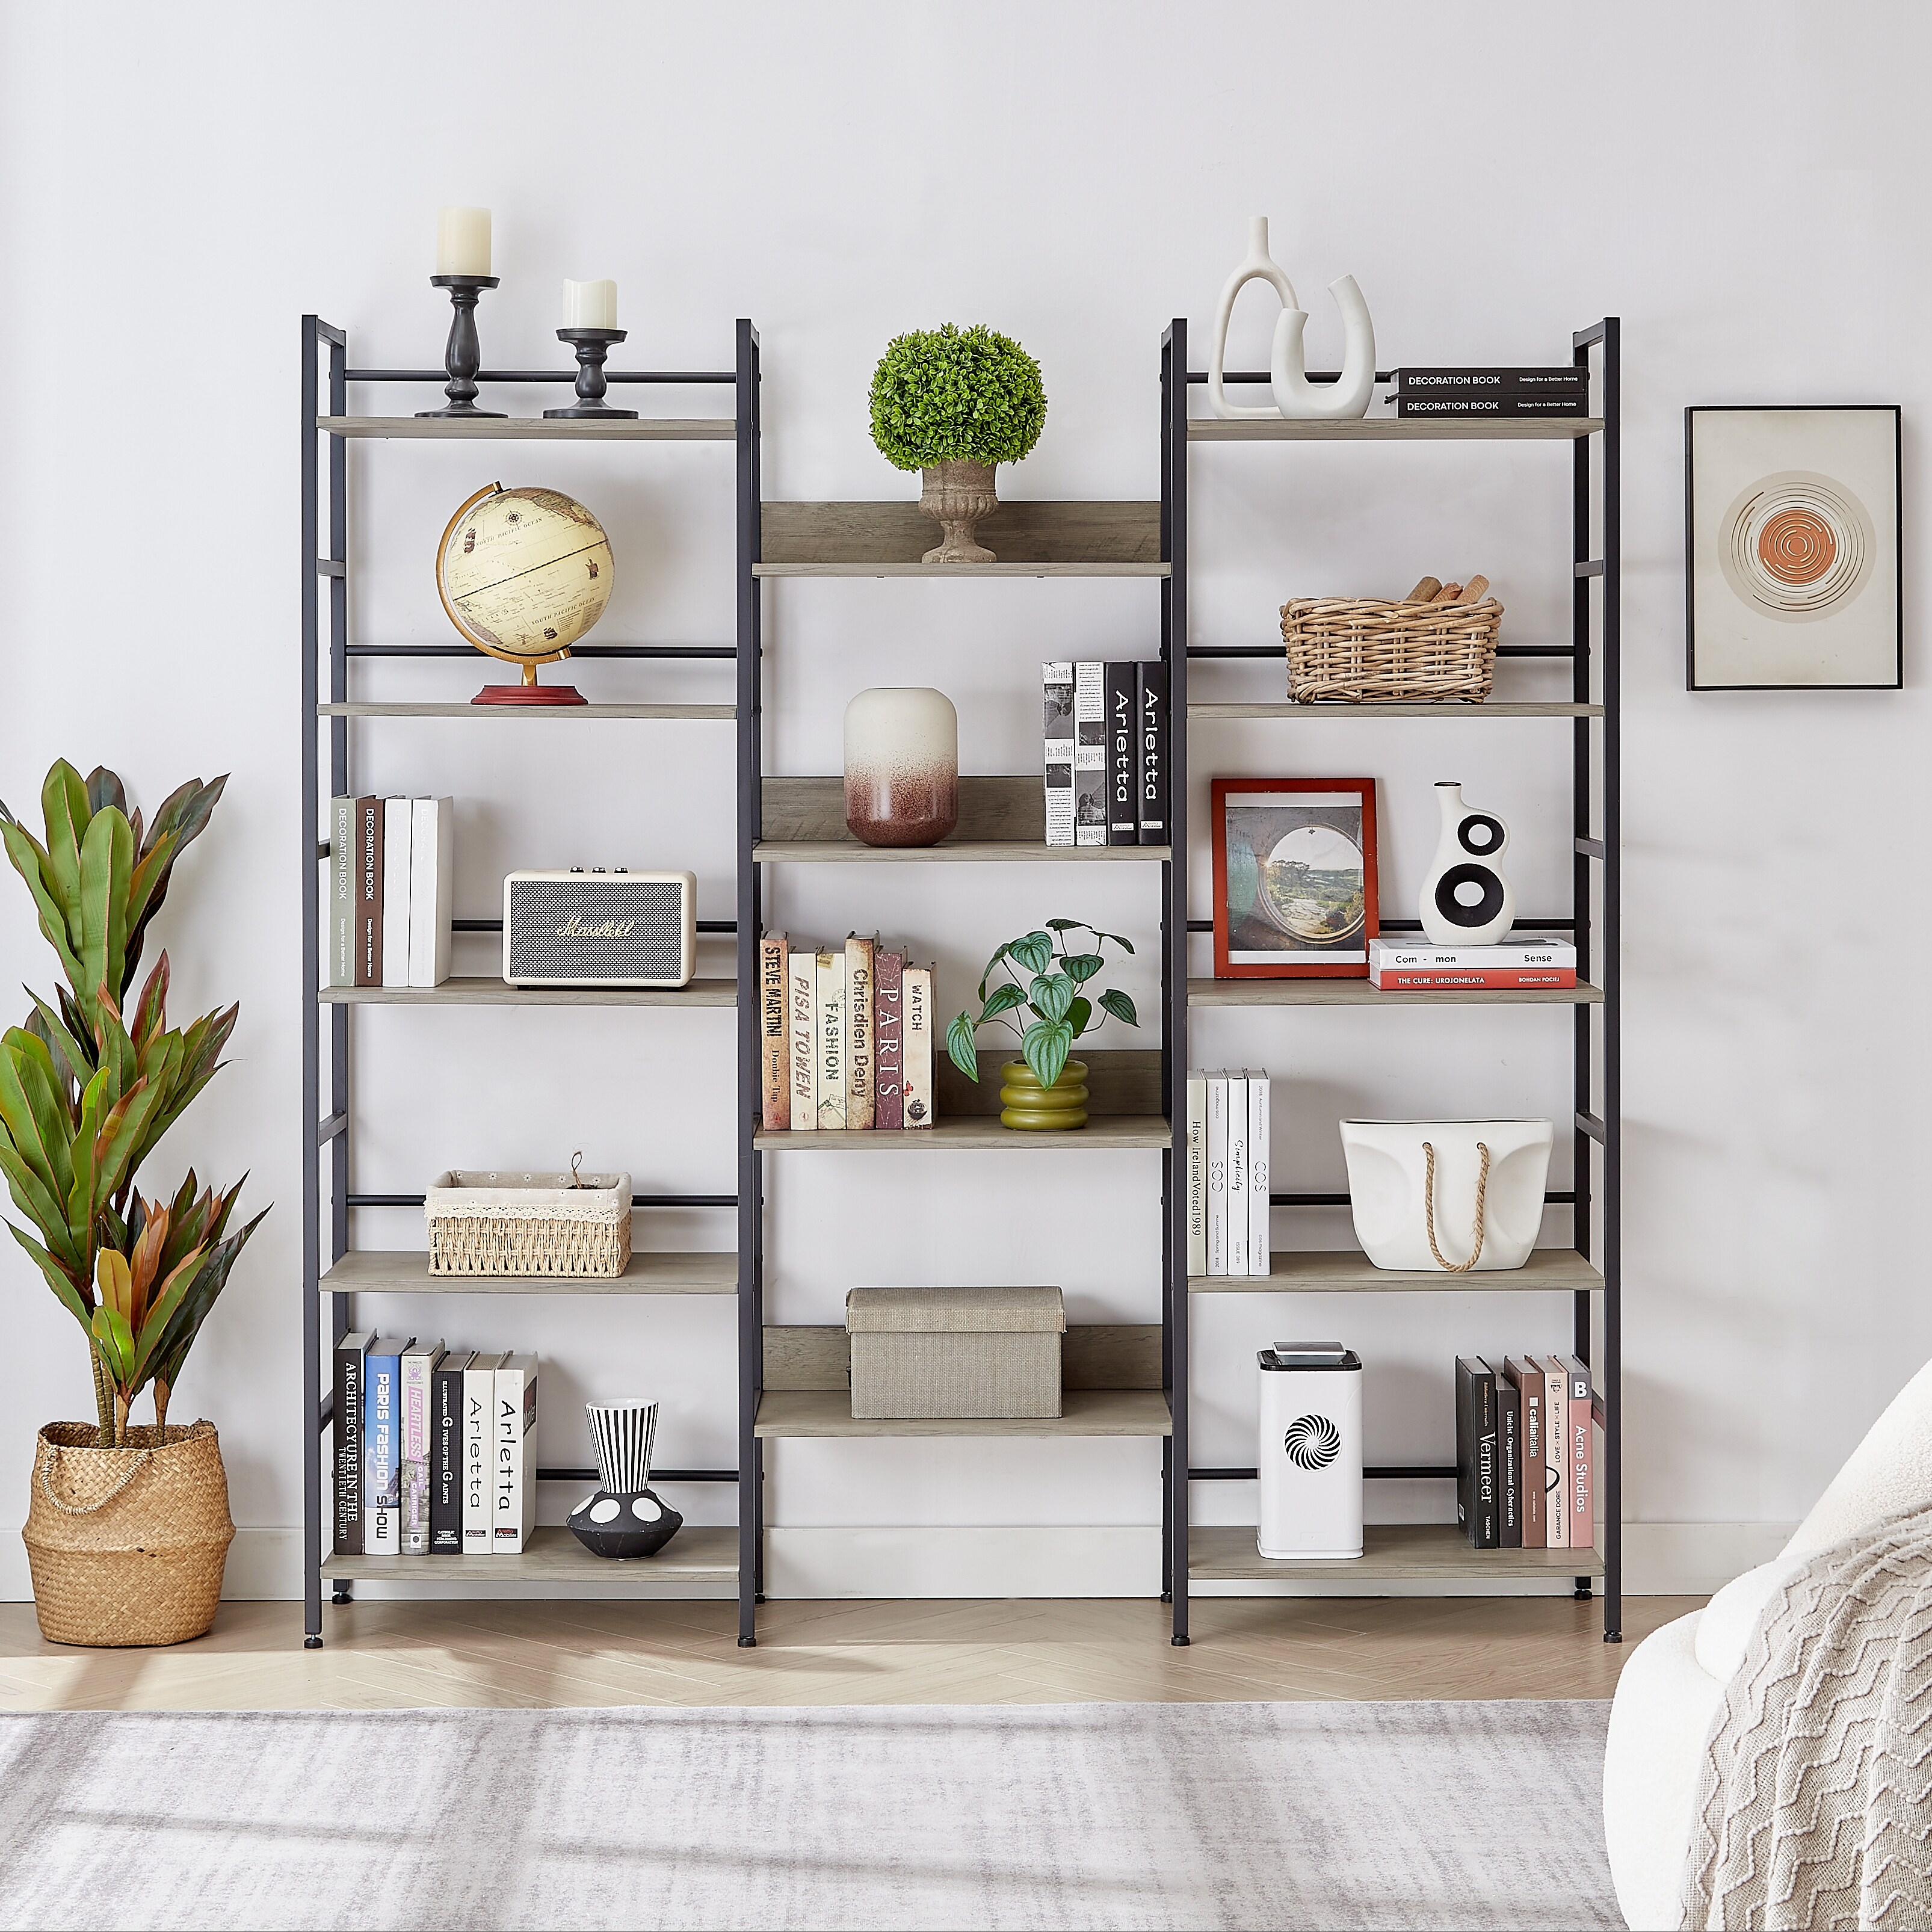 https://ak1.ostkcdn.com/images/products/is/images/direct/c0ad9a2464f26f9aeeee2ef43be7f3d84744747f/Triple-Wide-5-shelf-Bookshelves-Industrial-Retro-Wooden-Style-Home-and-Office-Large-Open-Bookshelves%2CGrey.jpg